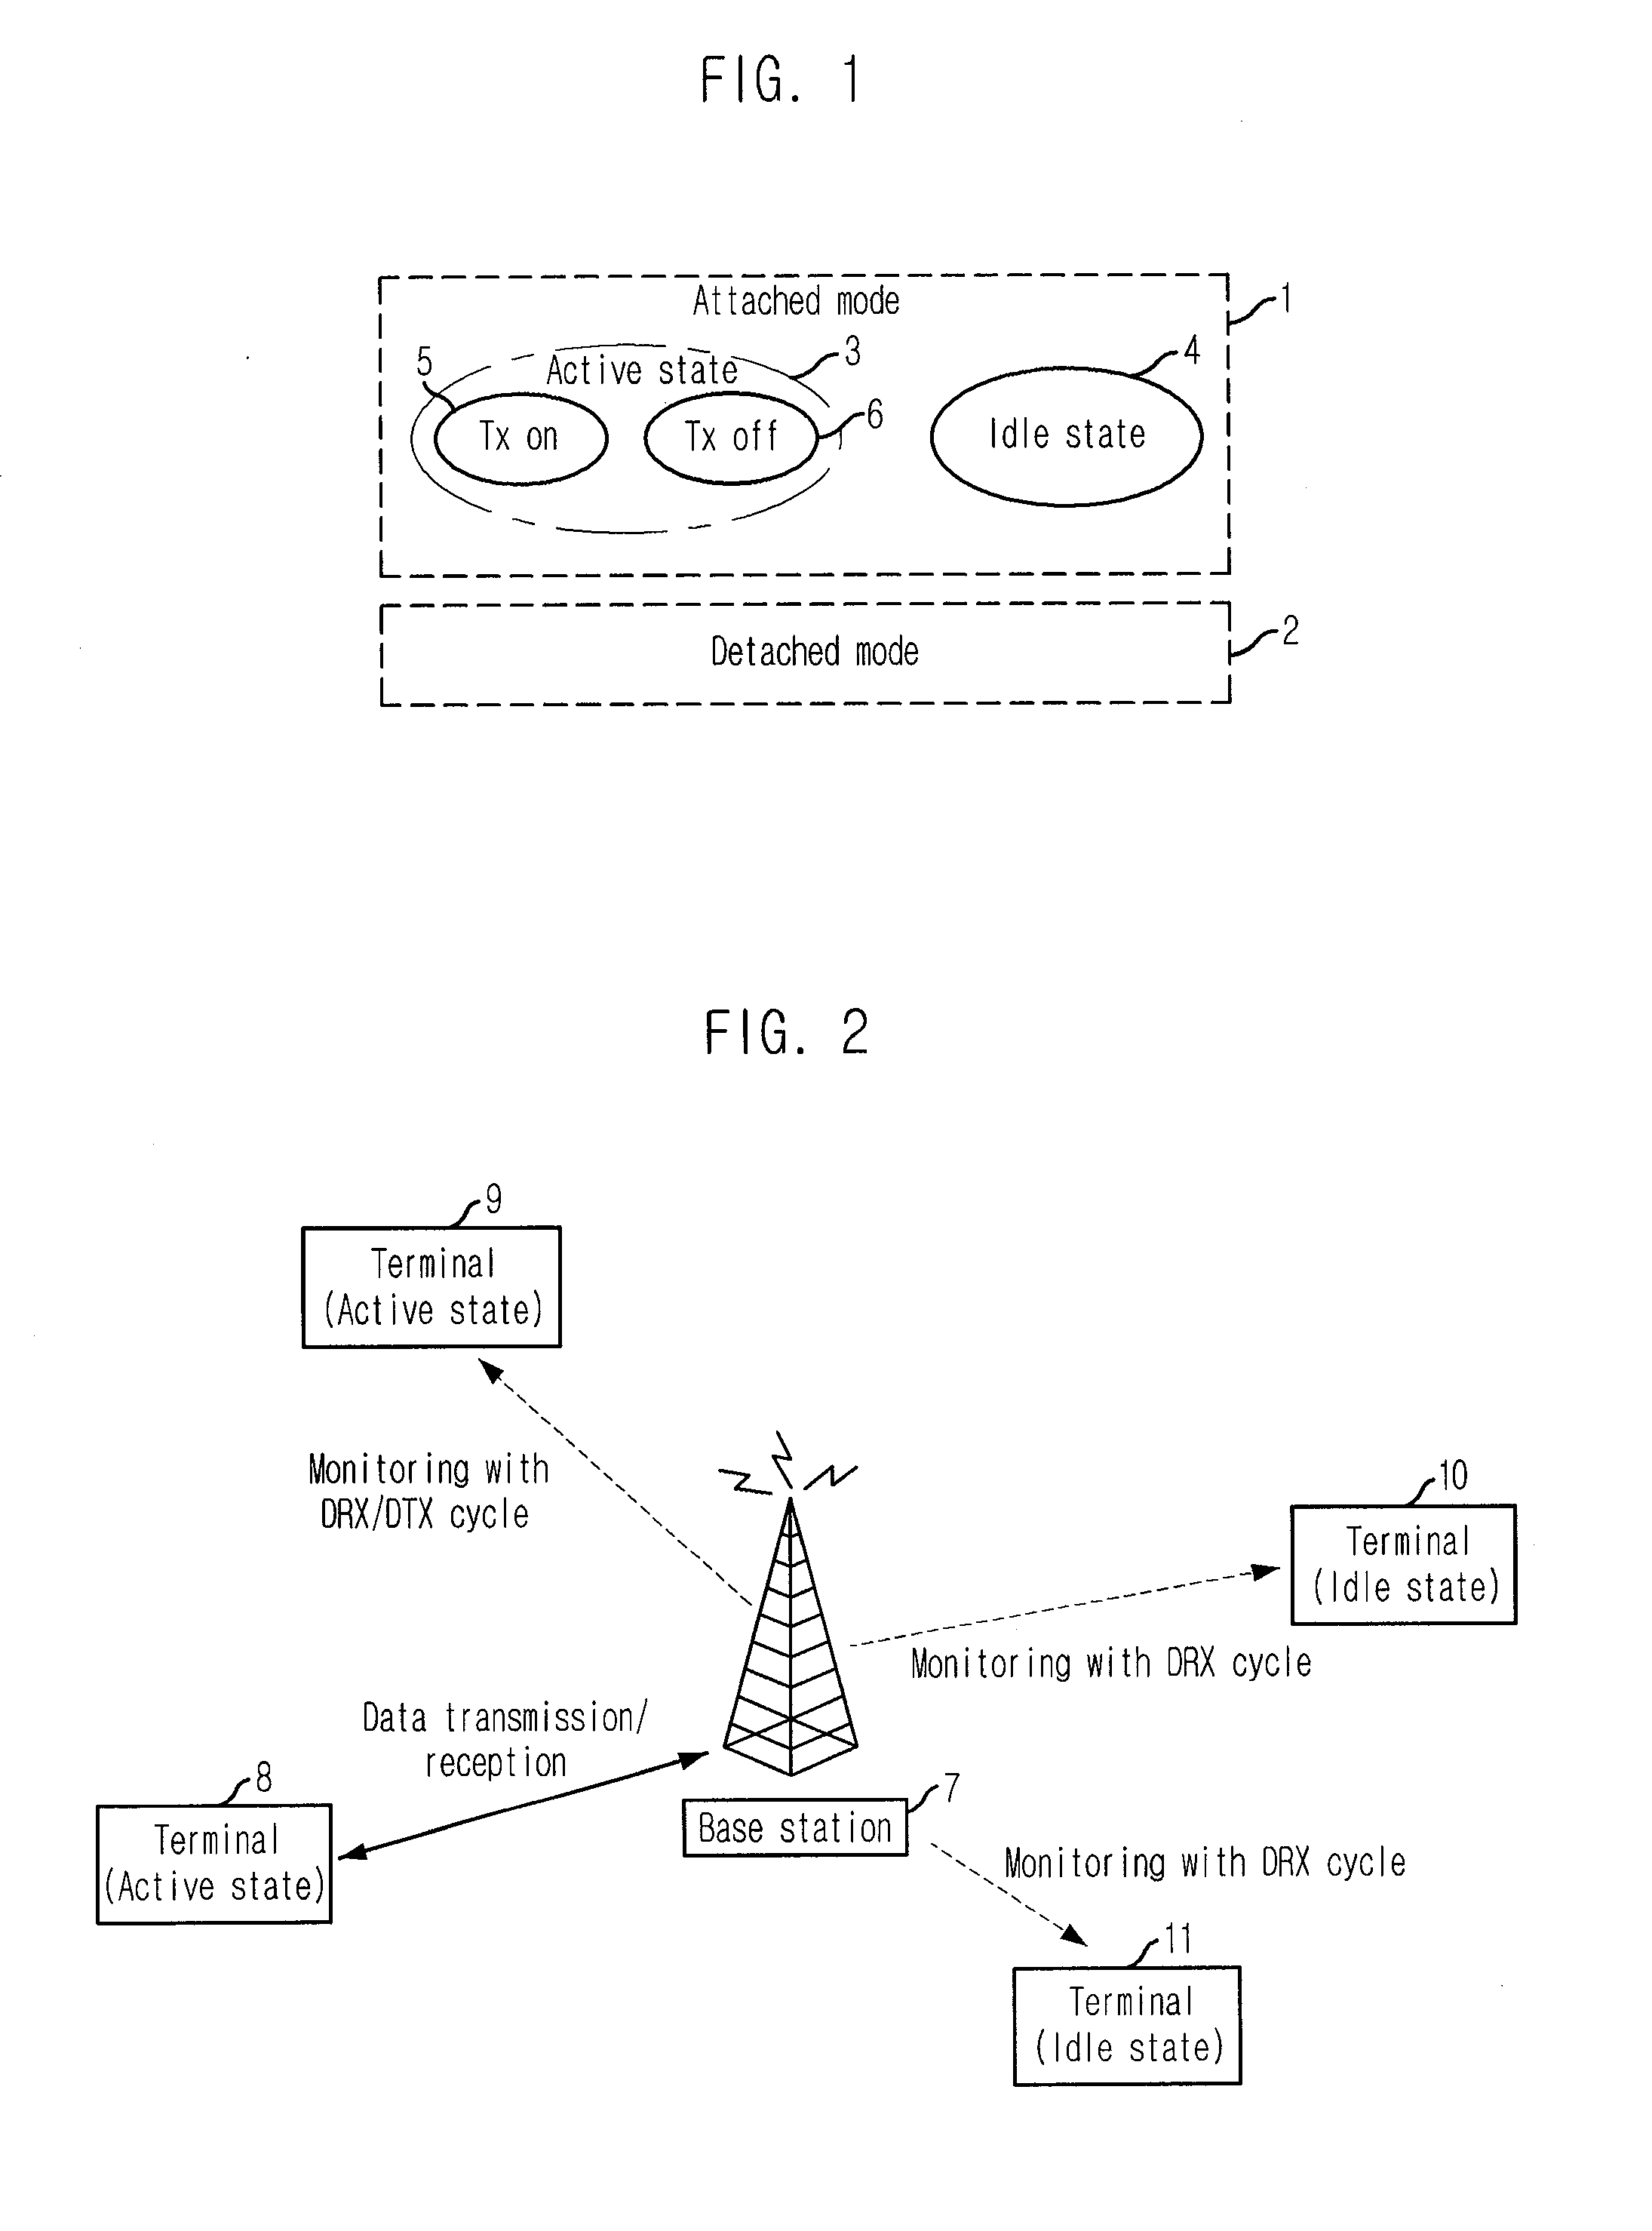 Method and Apparatus for Discontinuous Transmission/Reception Operation for Reducing Power Consumption in Celluar System